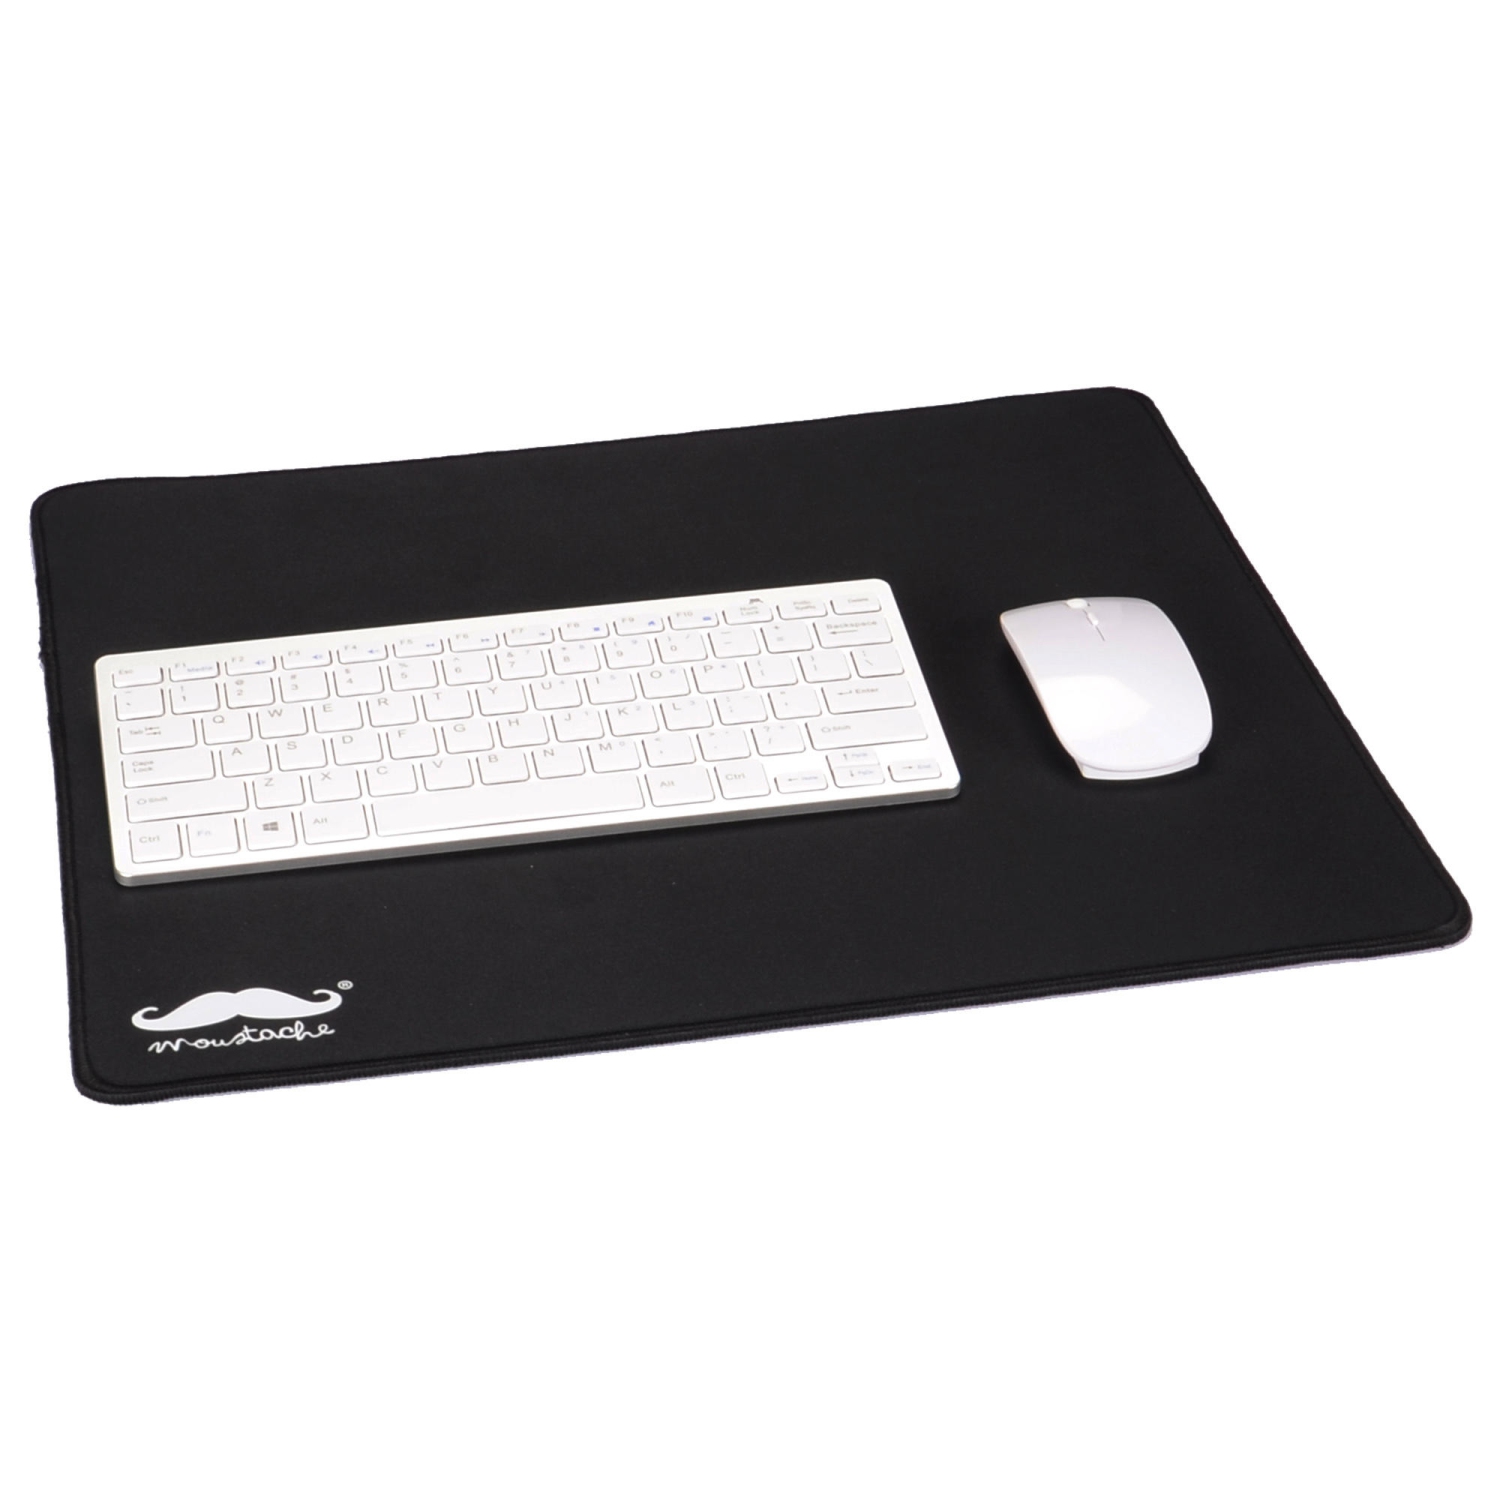 Moustache Gaming Mouse Pad Mat Standard Size (450x 400 x 4 mm) Keyboard Pad Mousepad Water-Resistant with Non-Slip Grippy Rubber Base, Smooth Surface, Durable Edges - Black